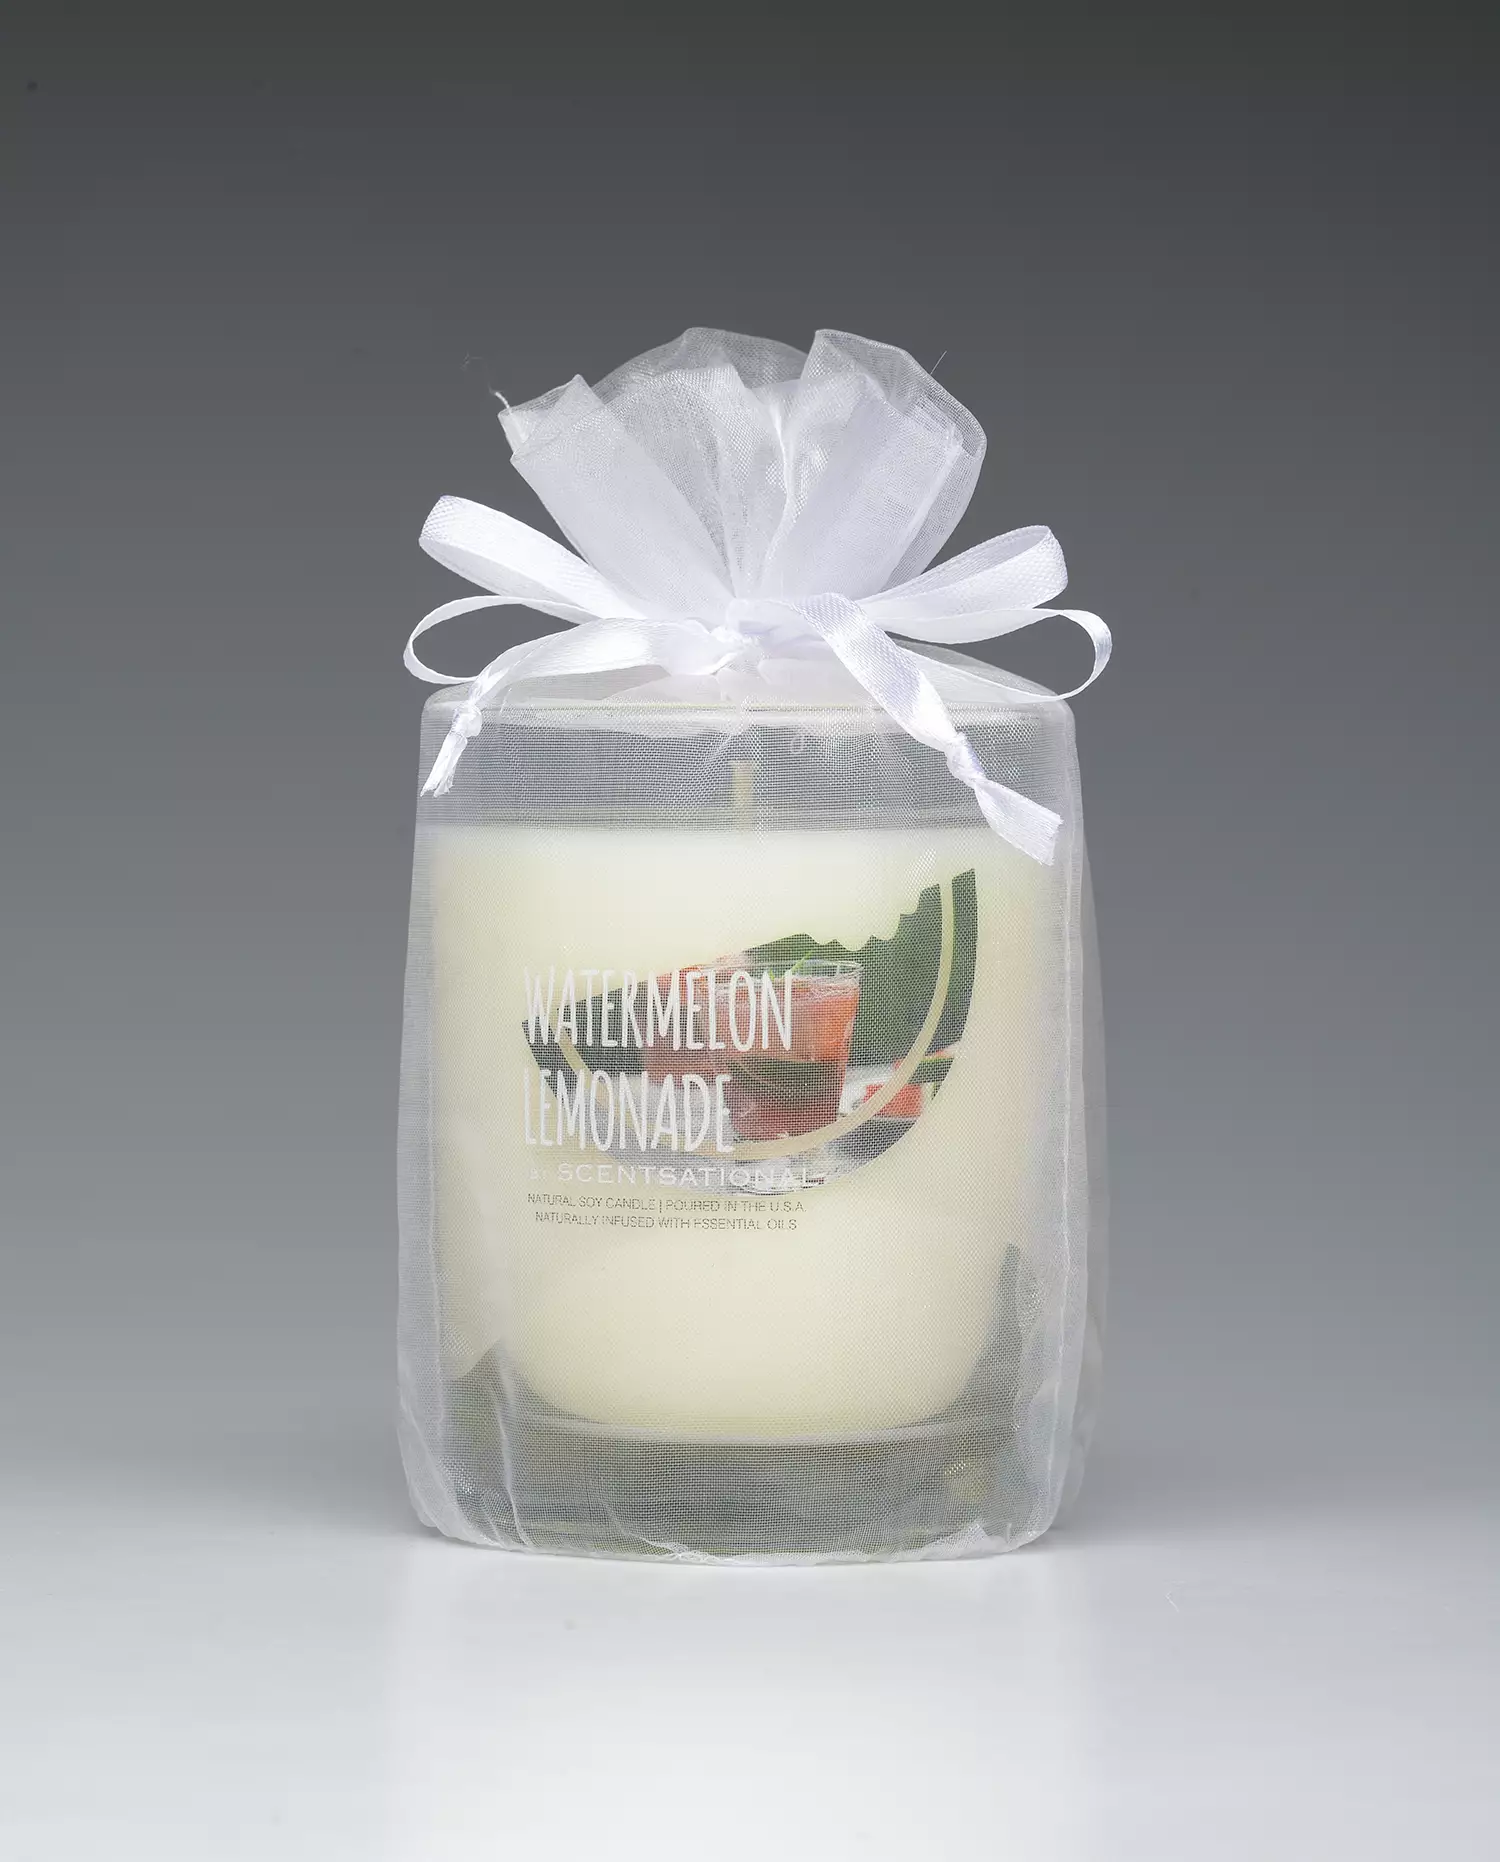 Candle Warmers Etc Watermelon Lemonade Wax Melts - Fruit Scented Soy Blend  with High Fragrance Load